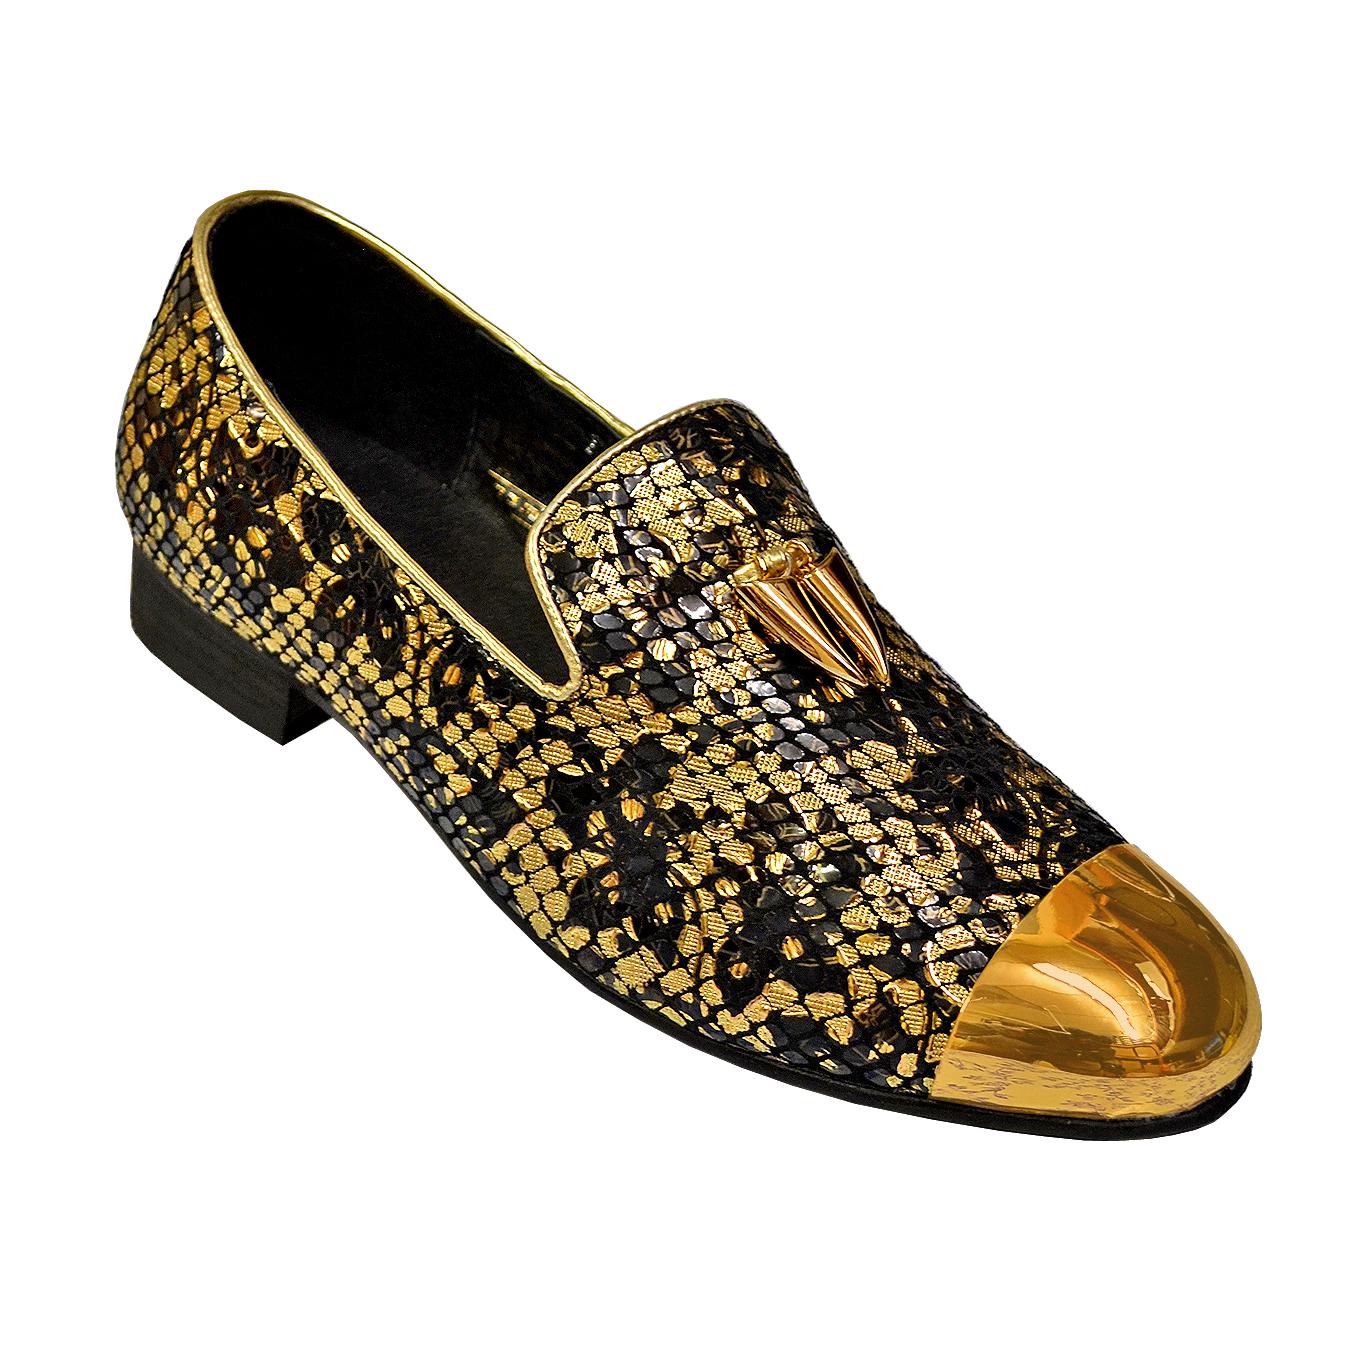 Fiesso Metallic Gold / Black / Gold Snake Print Genuine Leather Loafer ...